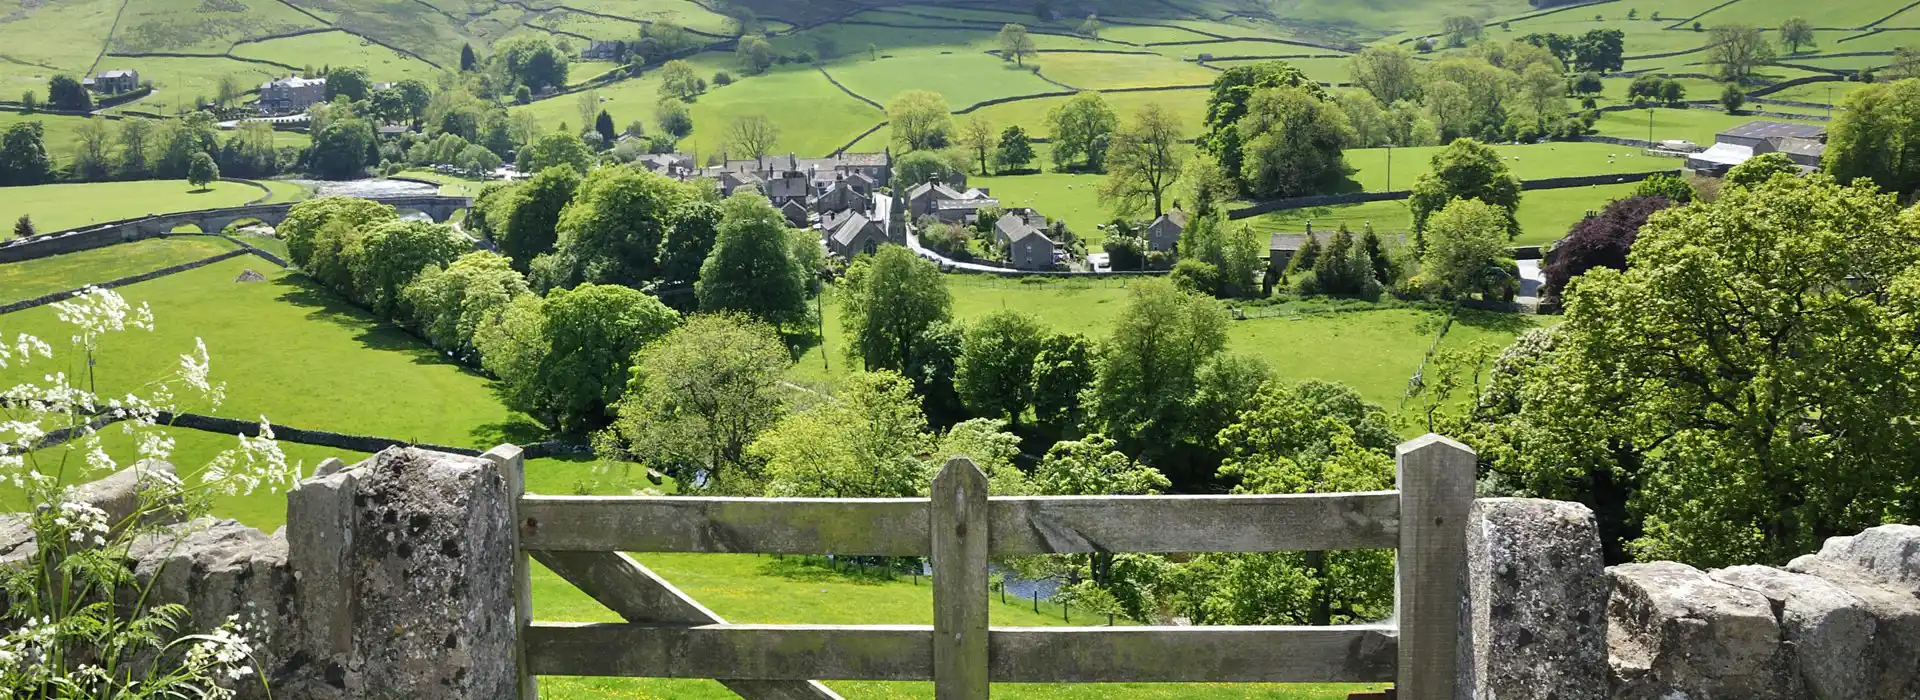 Best campsites in the Yorkshire Dales